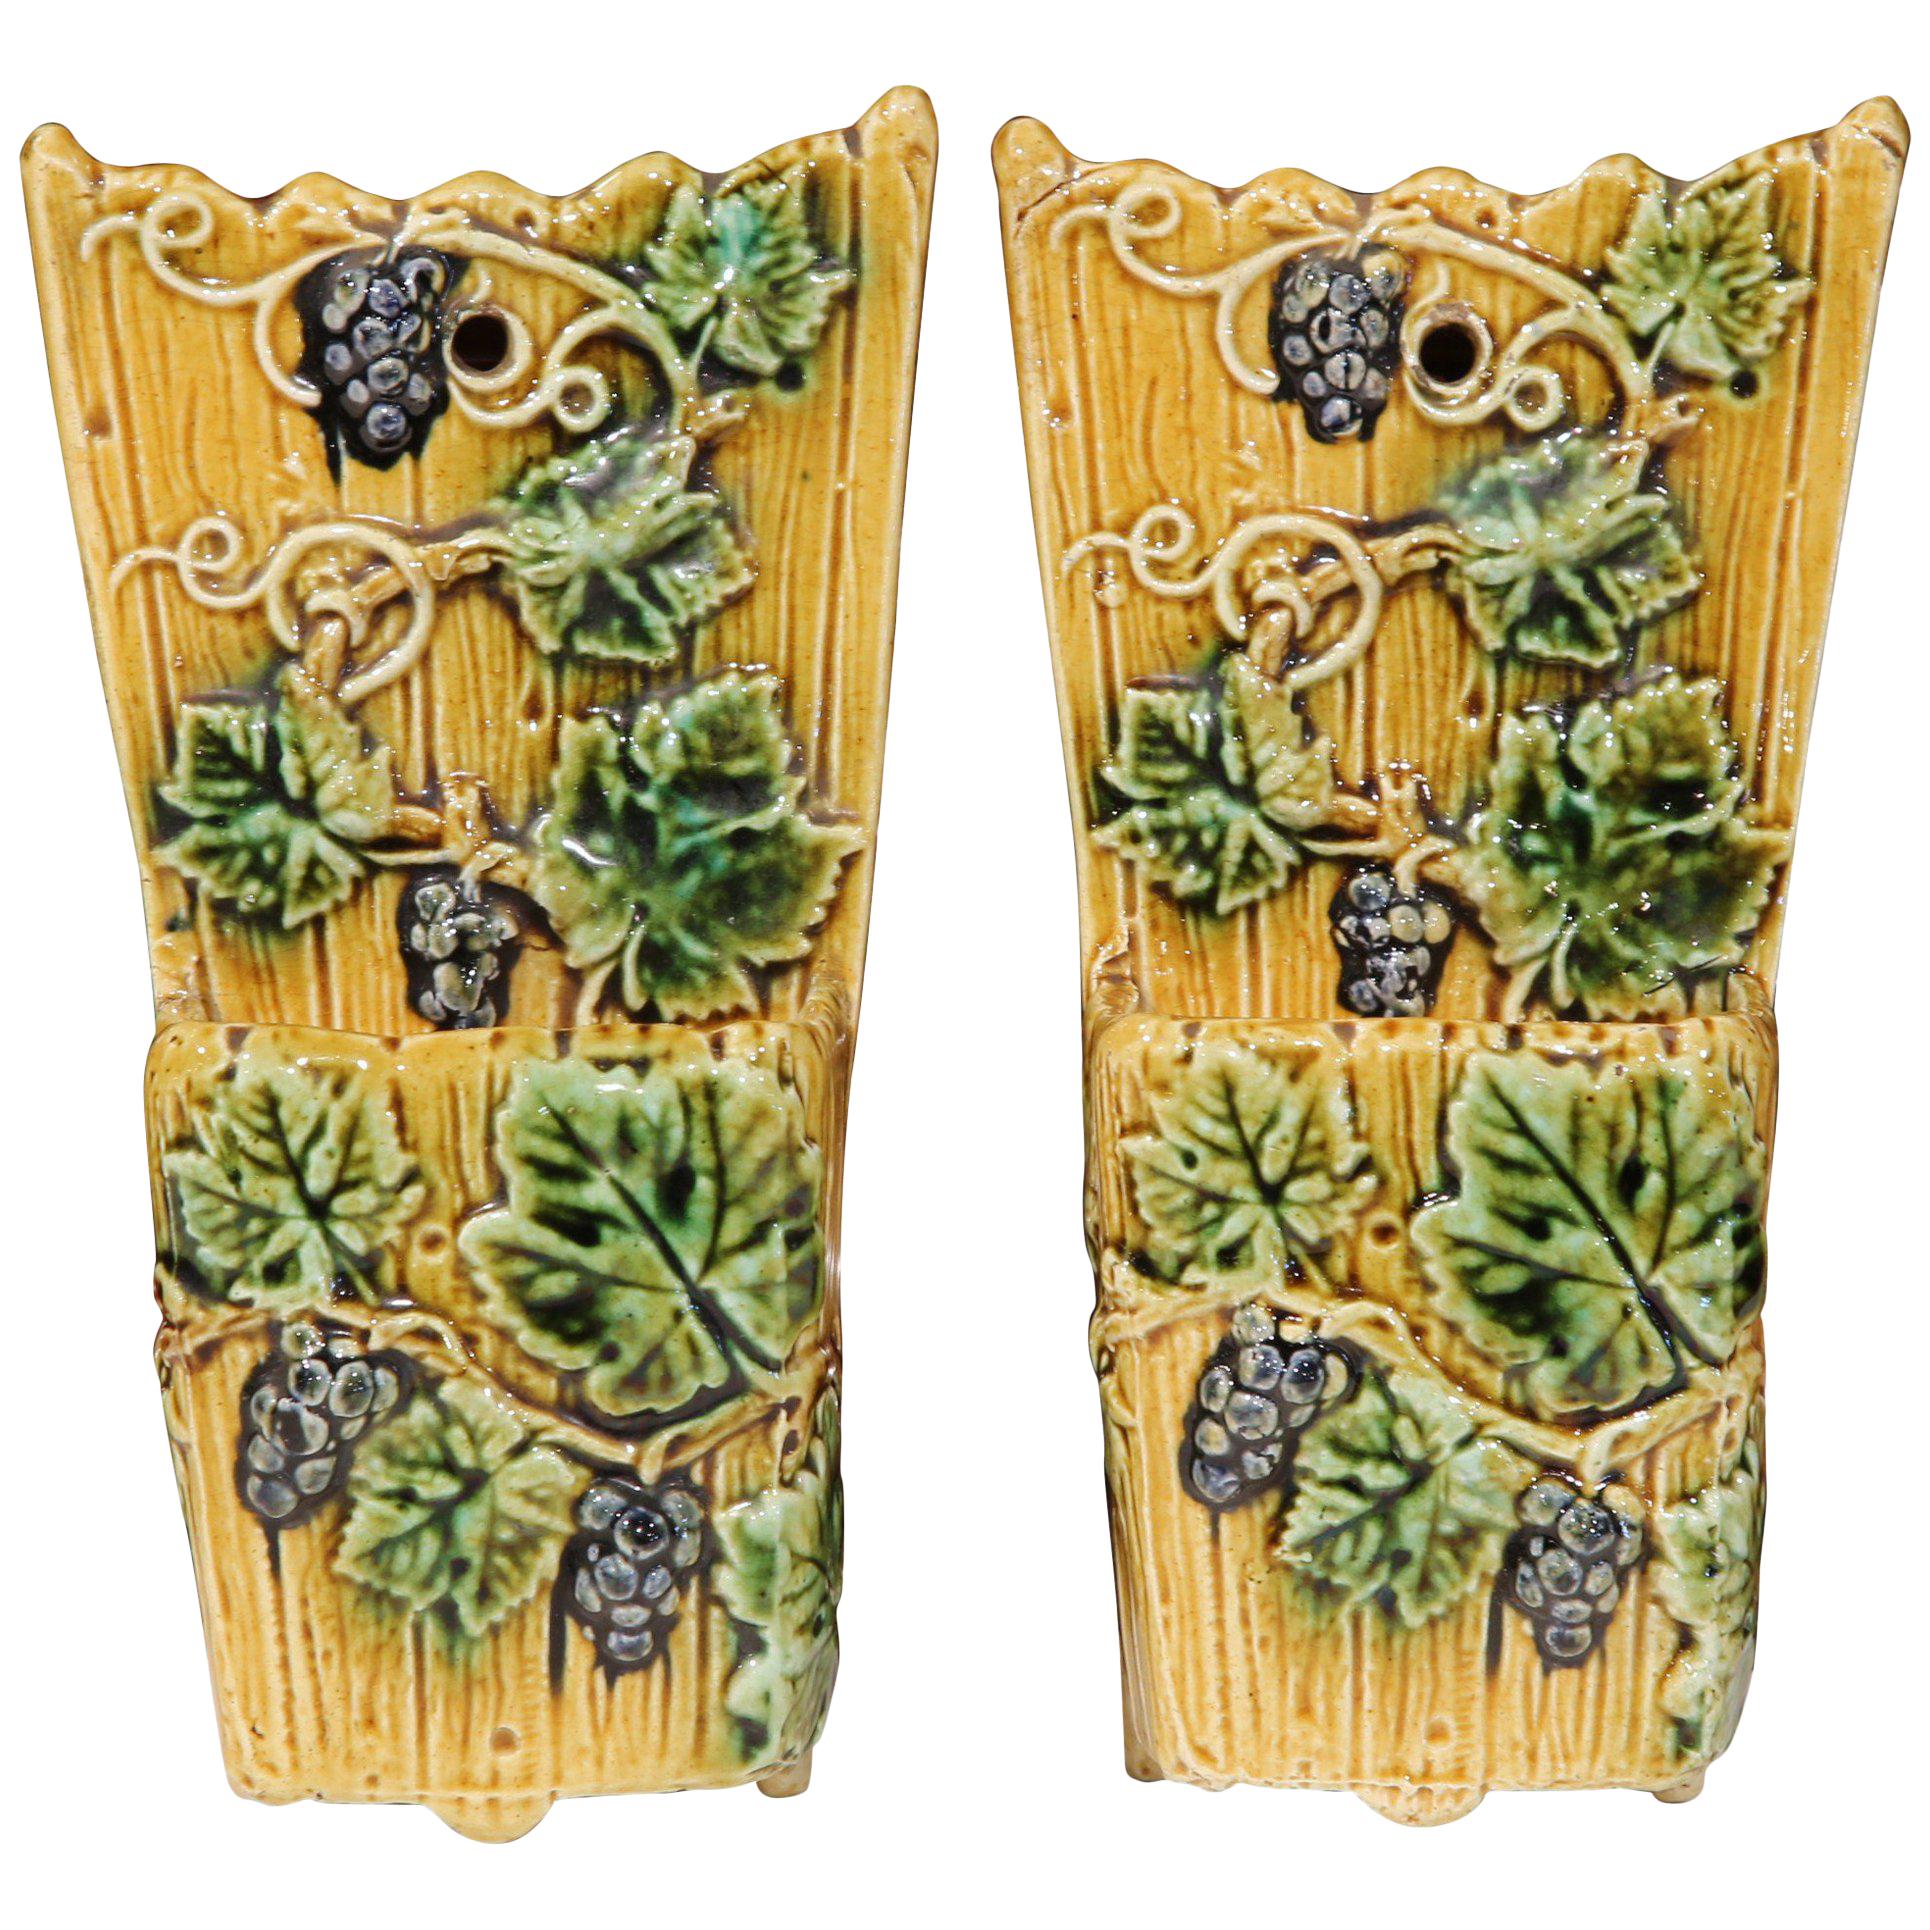 Hang plants or other greenery on the wall using this fine, colorful pair of antique Majolica wall pots. Created in France, circa 1890, the wall hanging vases feature grapes and vines motifs in high relief in a vivid green and yellow color palette.